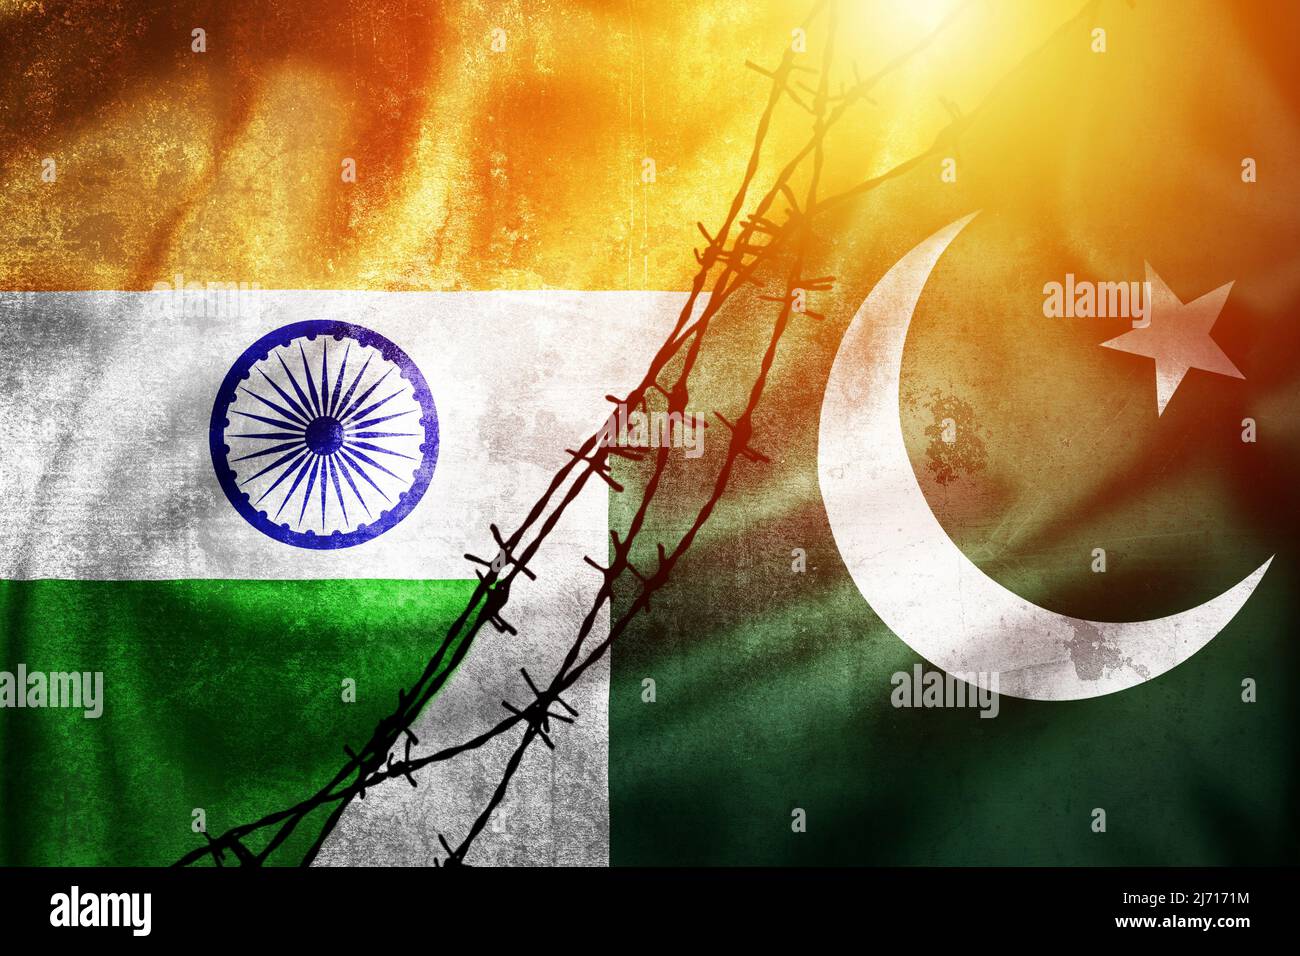 Grunge flags of India and Pakistan divided by barb wire sun haze illustration, concept of tense relations between India and Pakistan Stock Photo